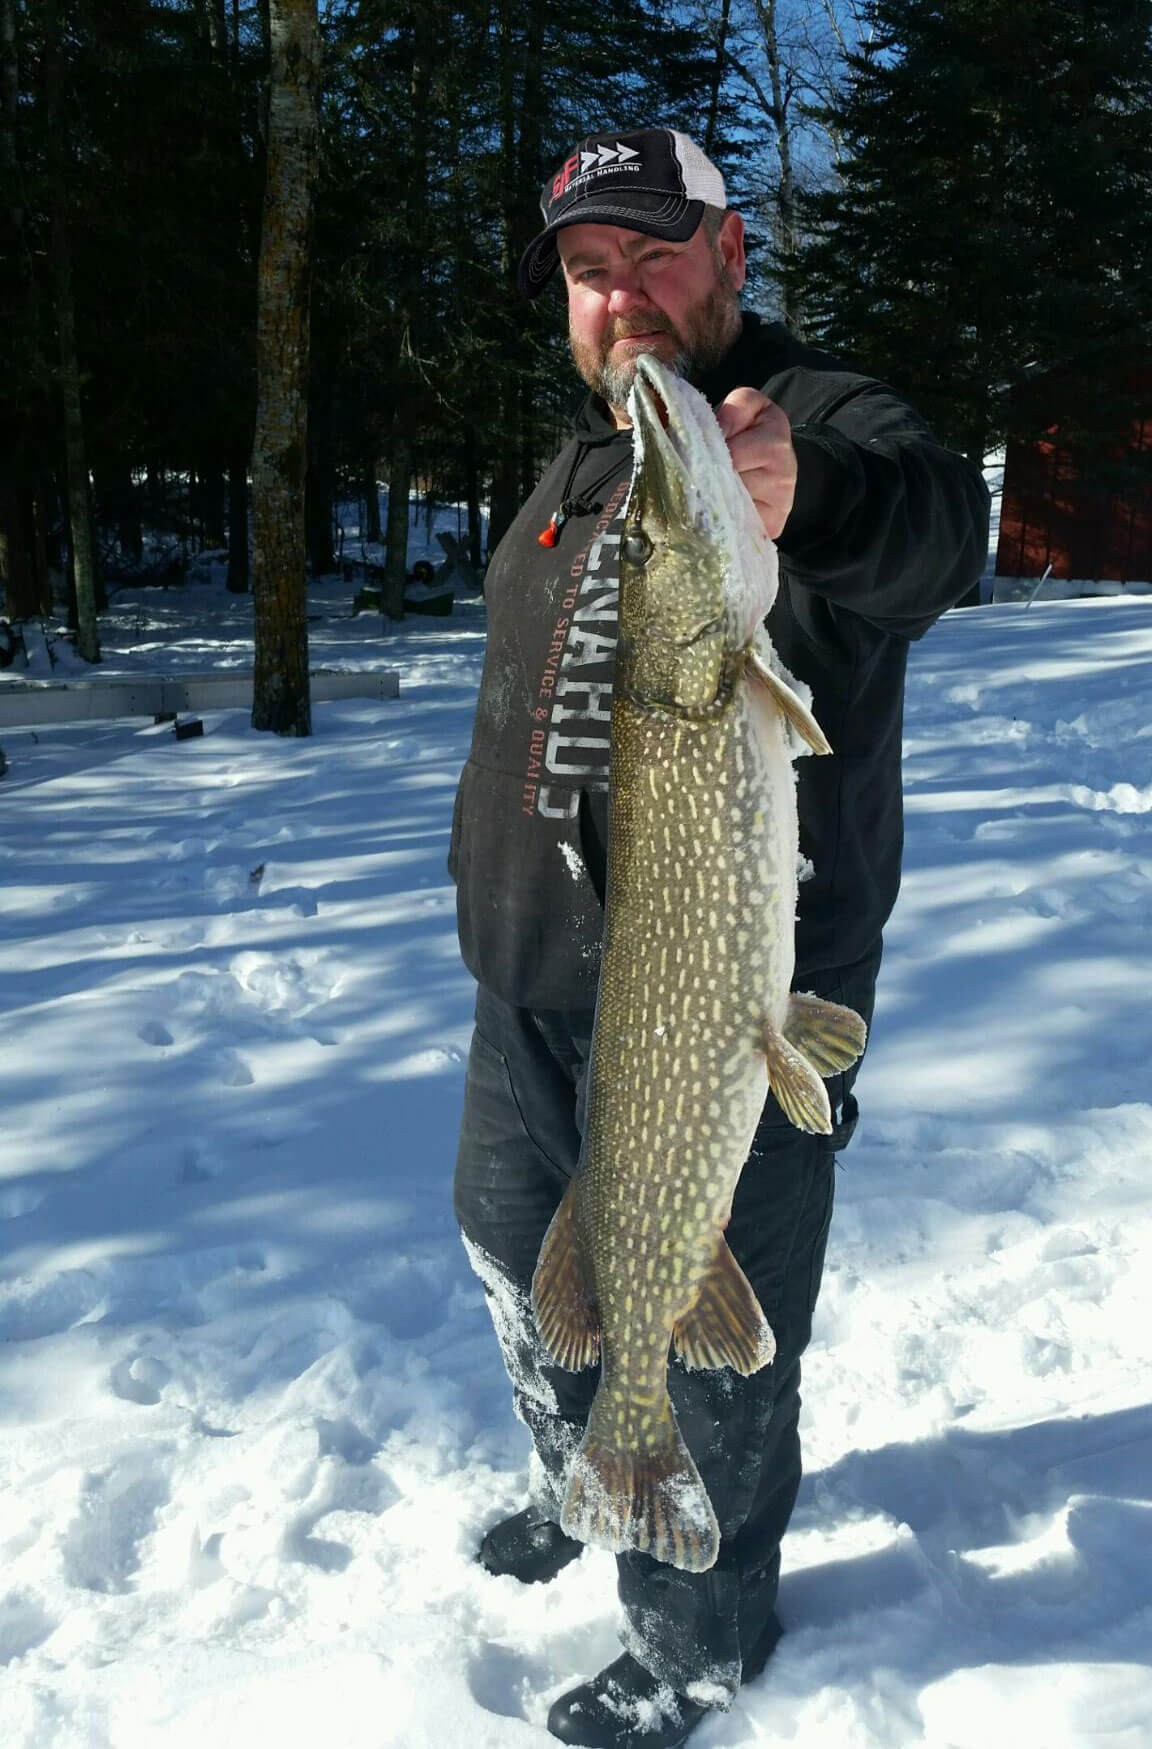 Tom Moore, SJF Solutions Specialist, recently caught this 17+ lb. Northern. That's quite a fish!